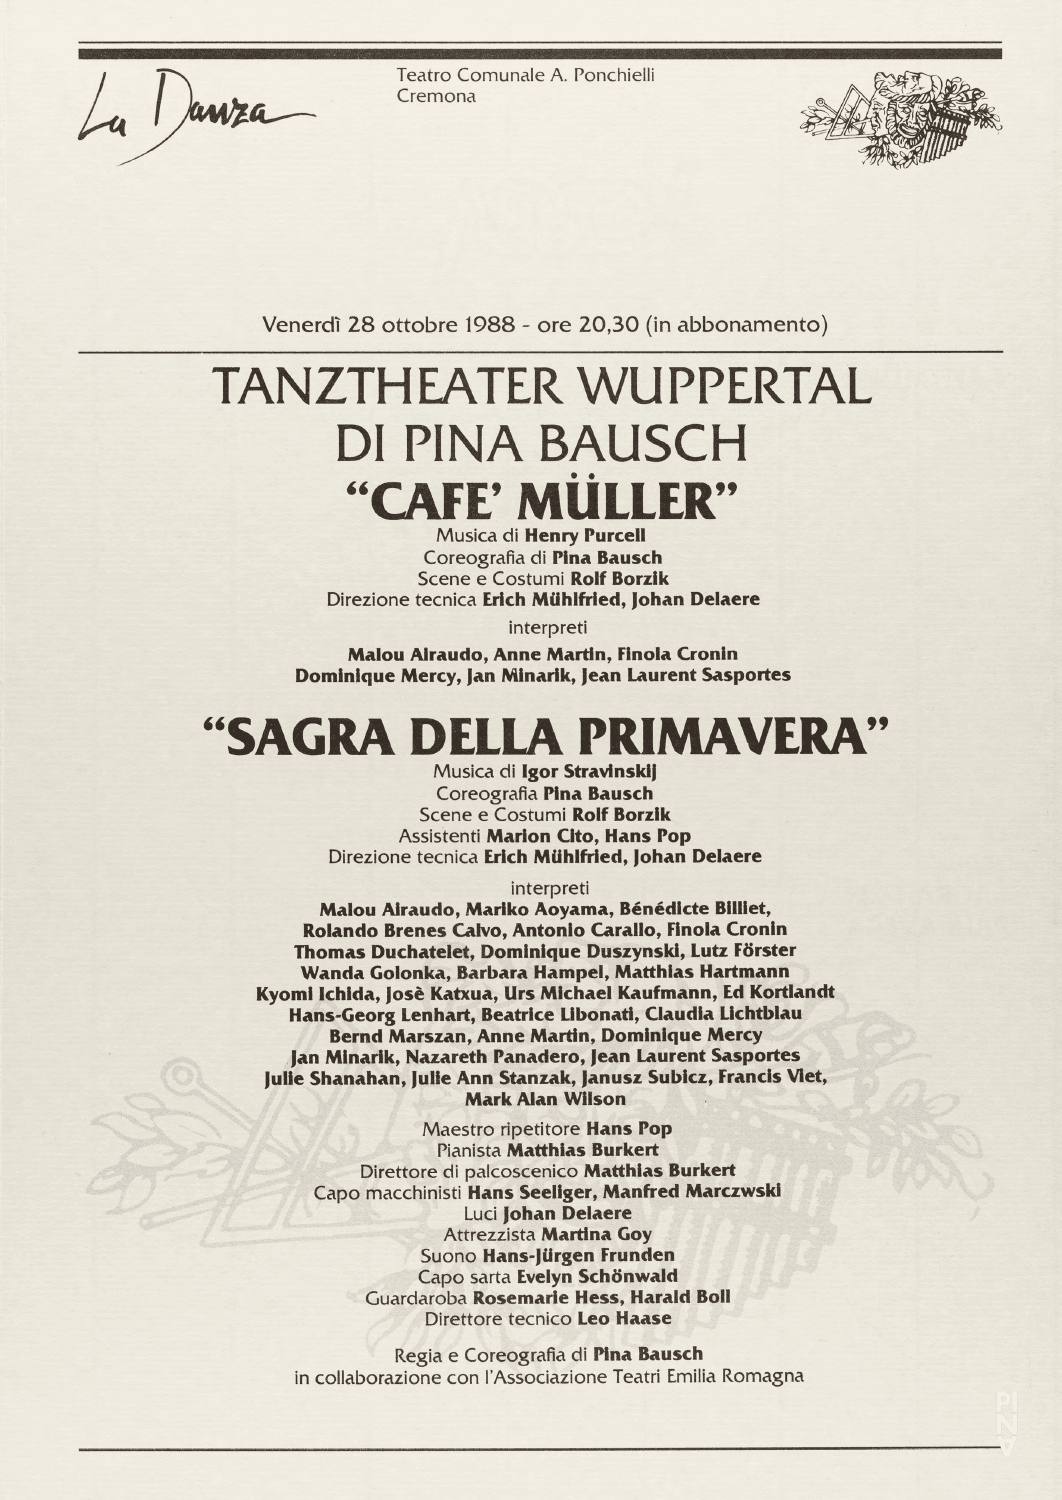 Evening leaflet for “Café Müller” and “The Rite of Spring” by Pina Bausch with Tanztheater Wuppertal in in Cremona, Oct. 28, 1988